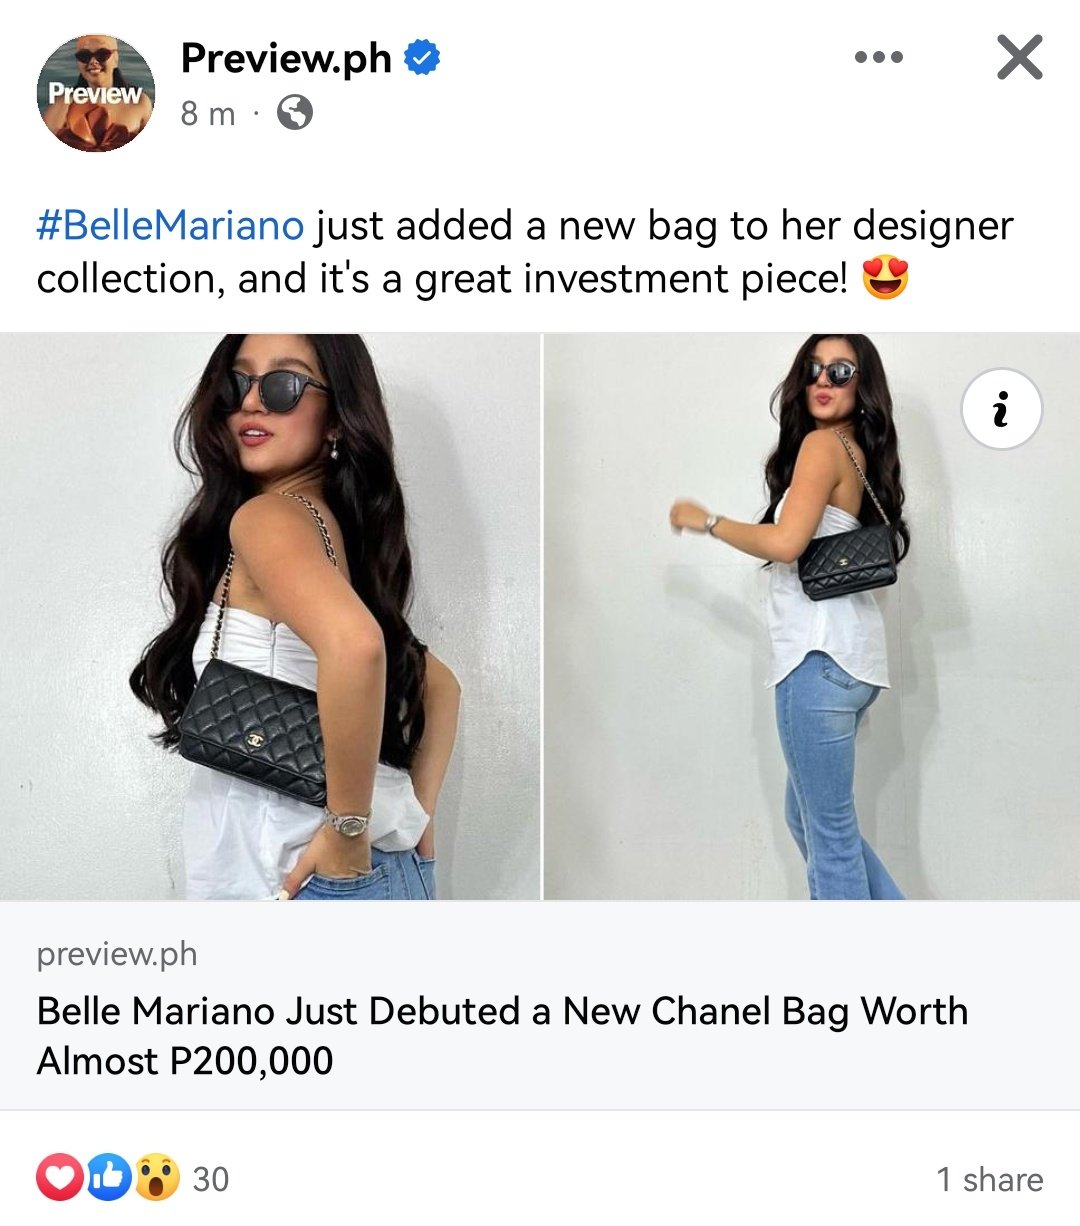 Belle Mariano Just Debuted A New Chanel Bag Worth Almost P200,000